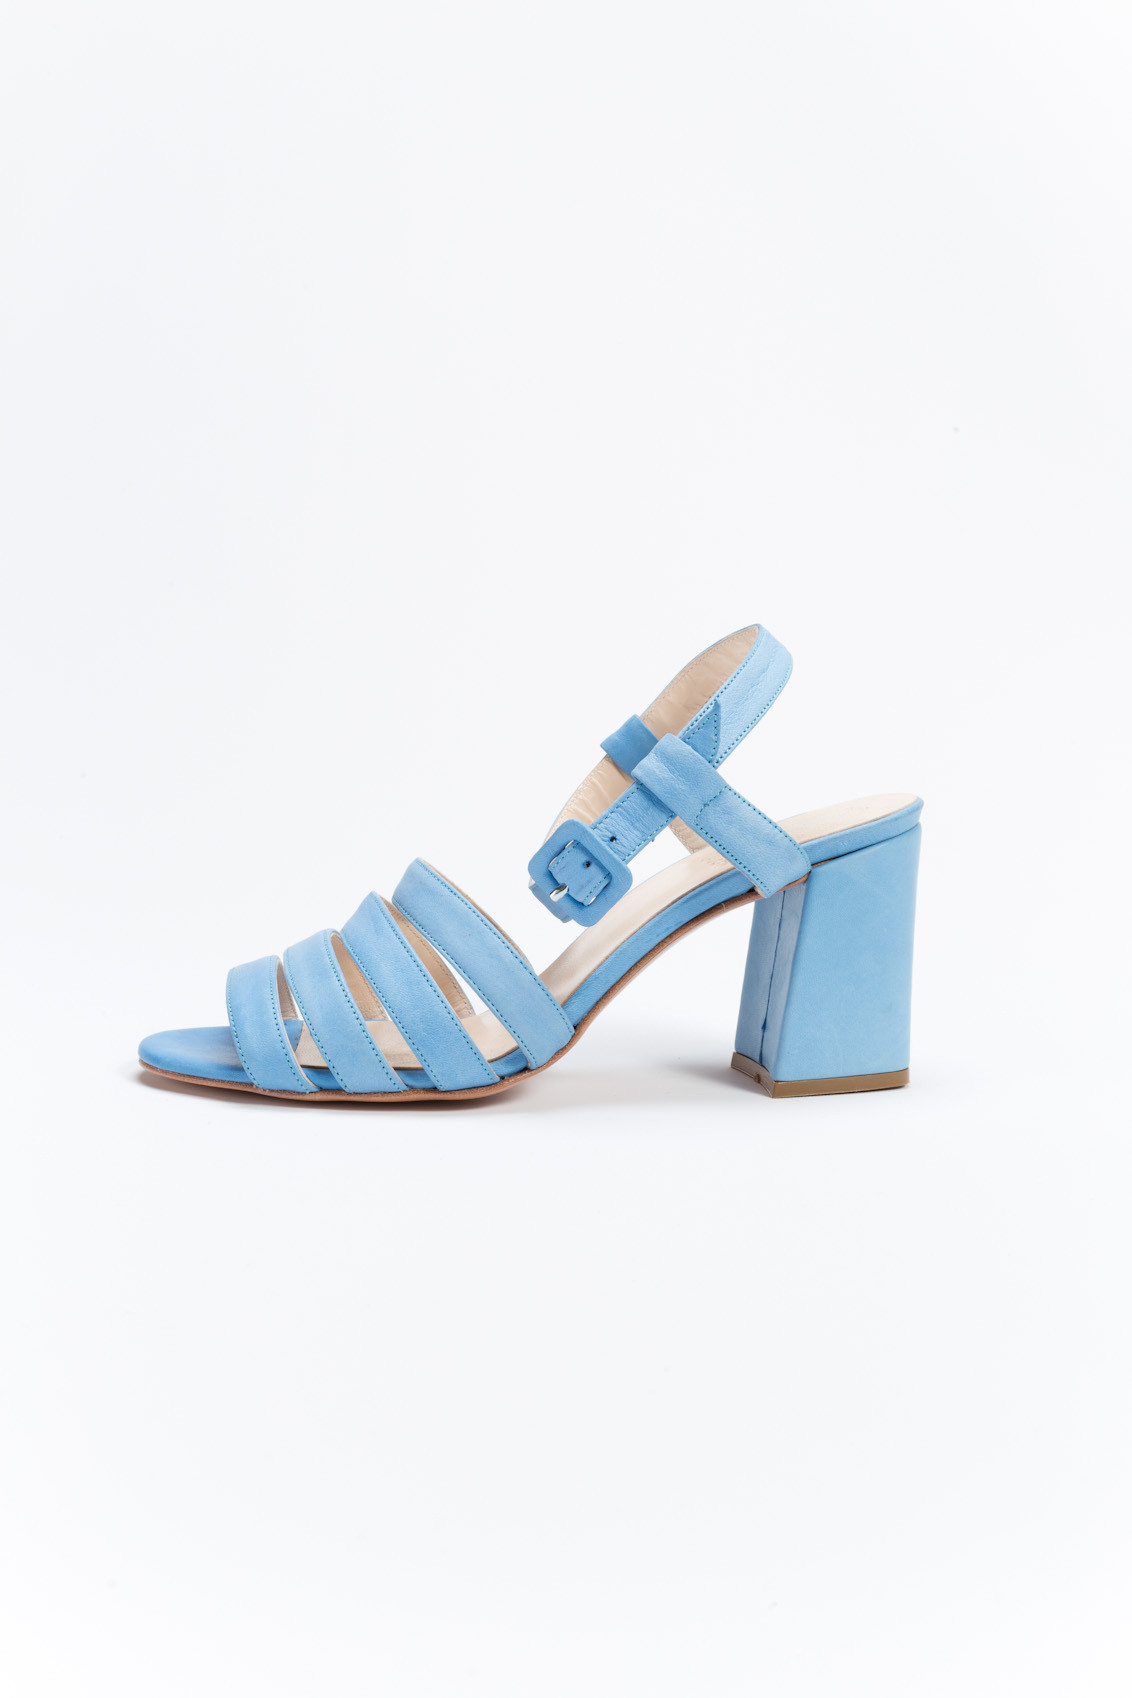 Maryam nassir zadeh Palma Leather Sandals in Blue (Sky Blue) | Lyst